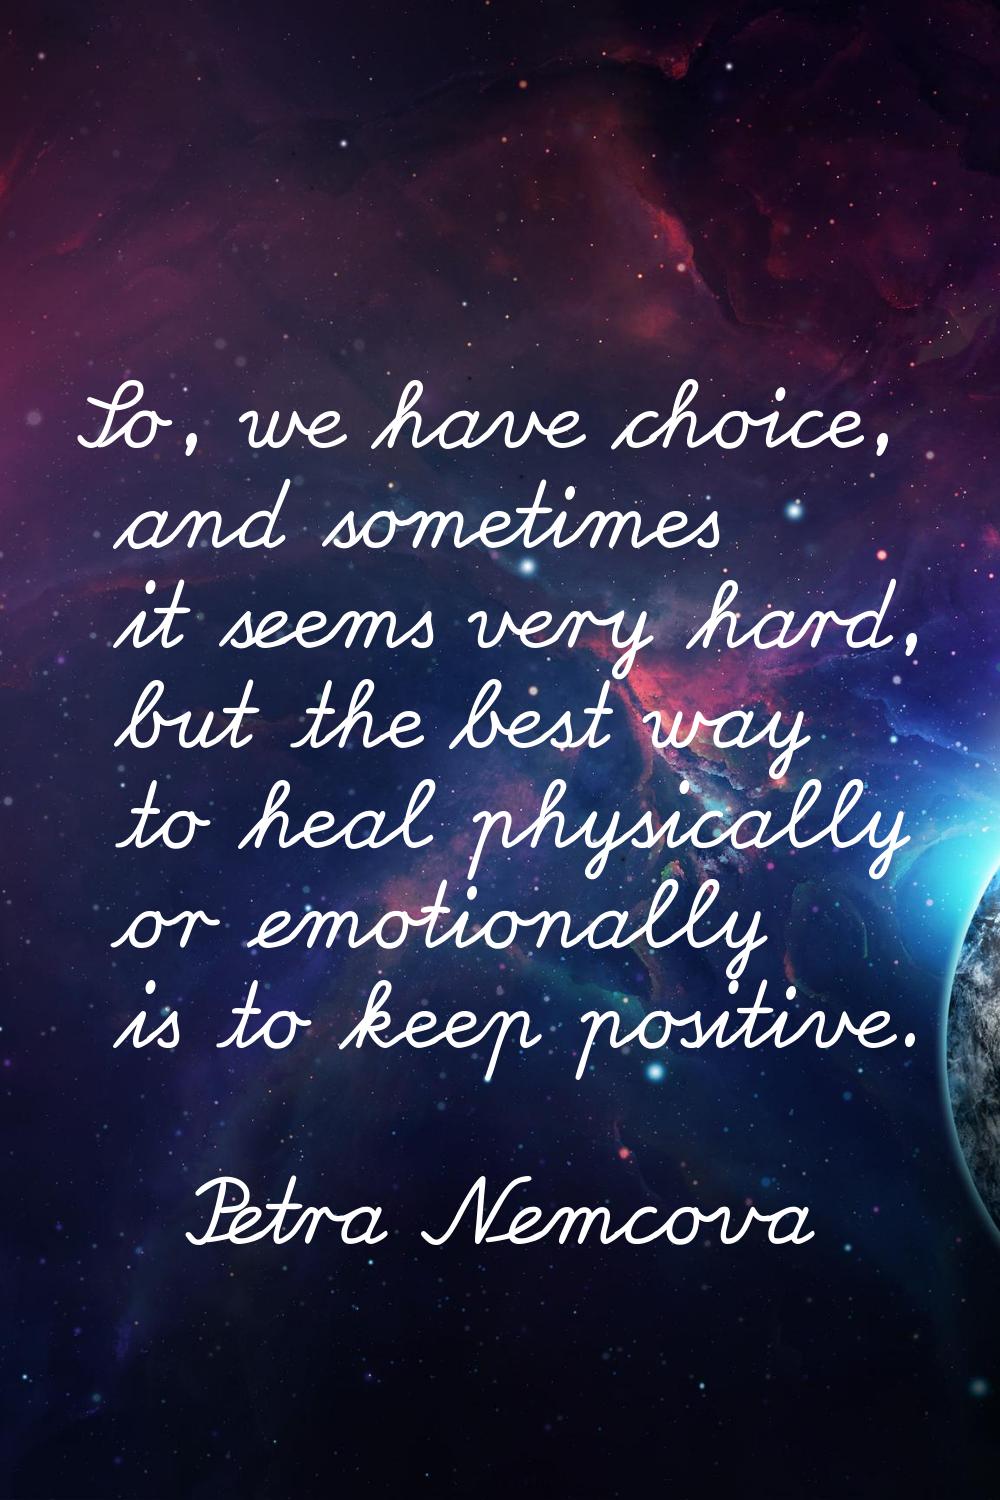 So, we have choice, and sometimes it seems very hard, but the best way to heal physically or emotio